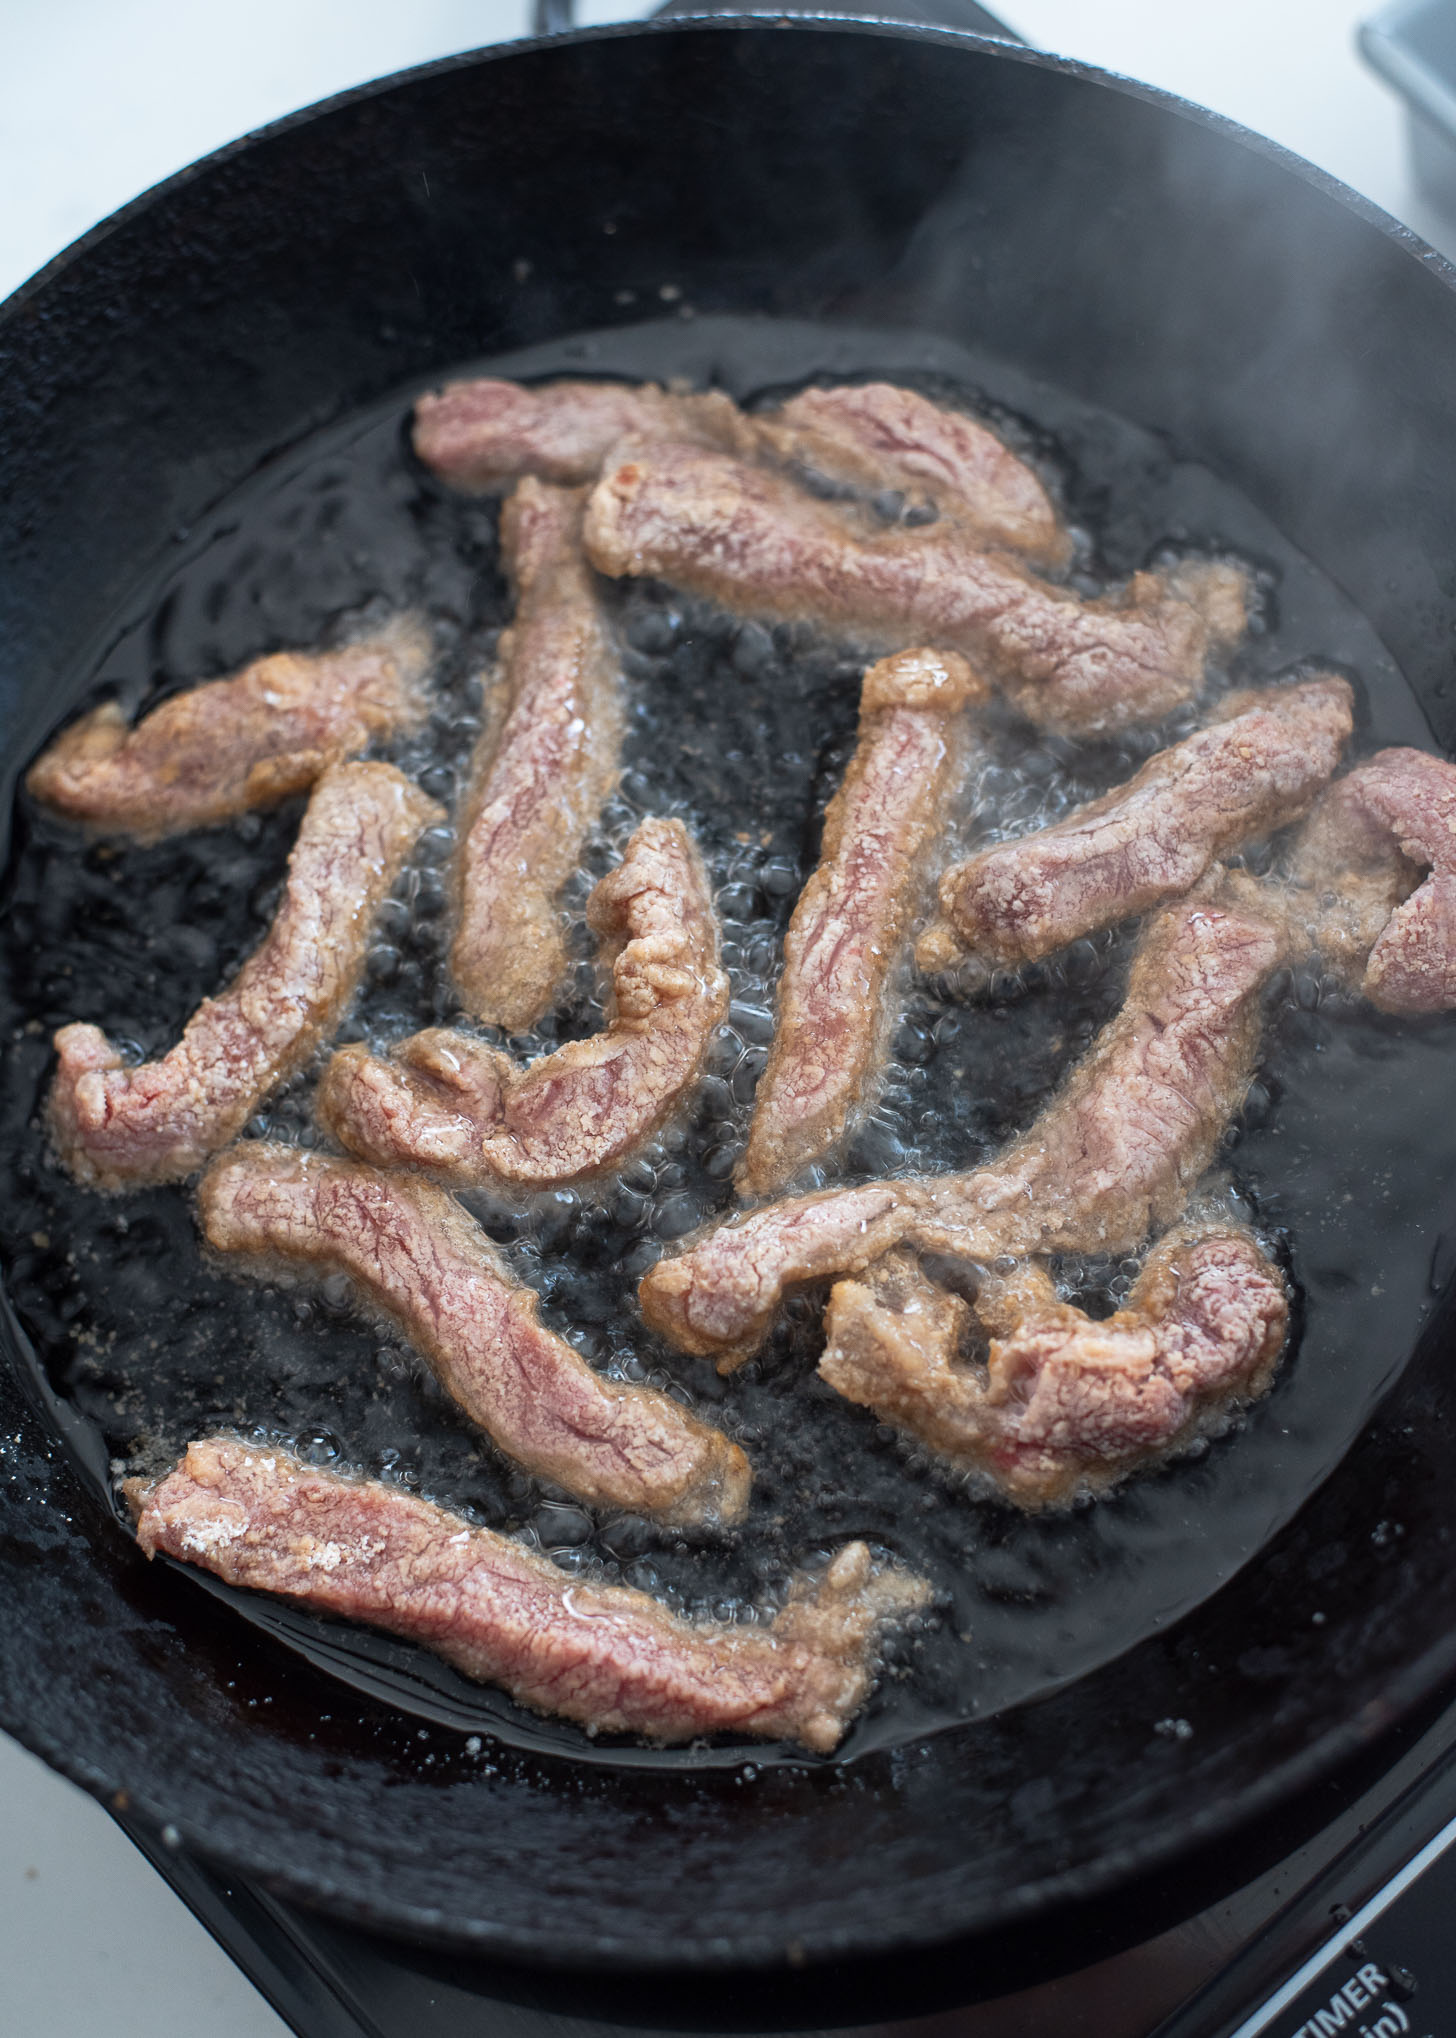 Beef strips are added to hot oil for the first deep-fry.